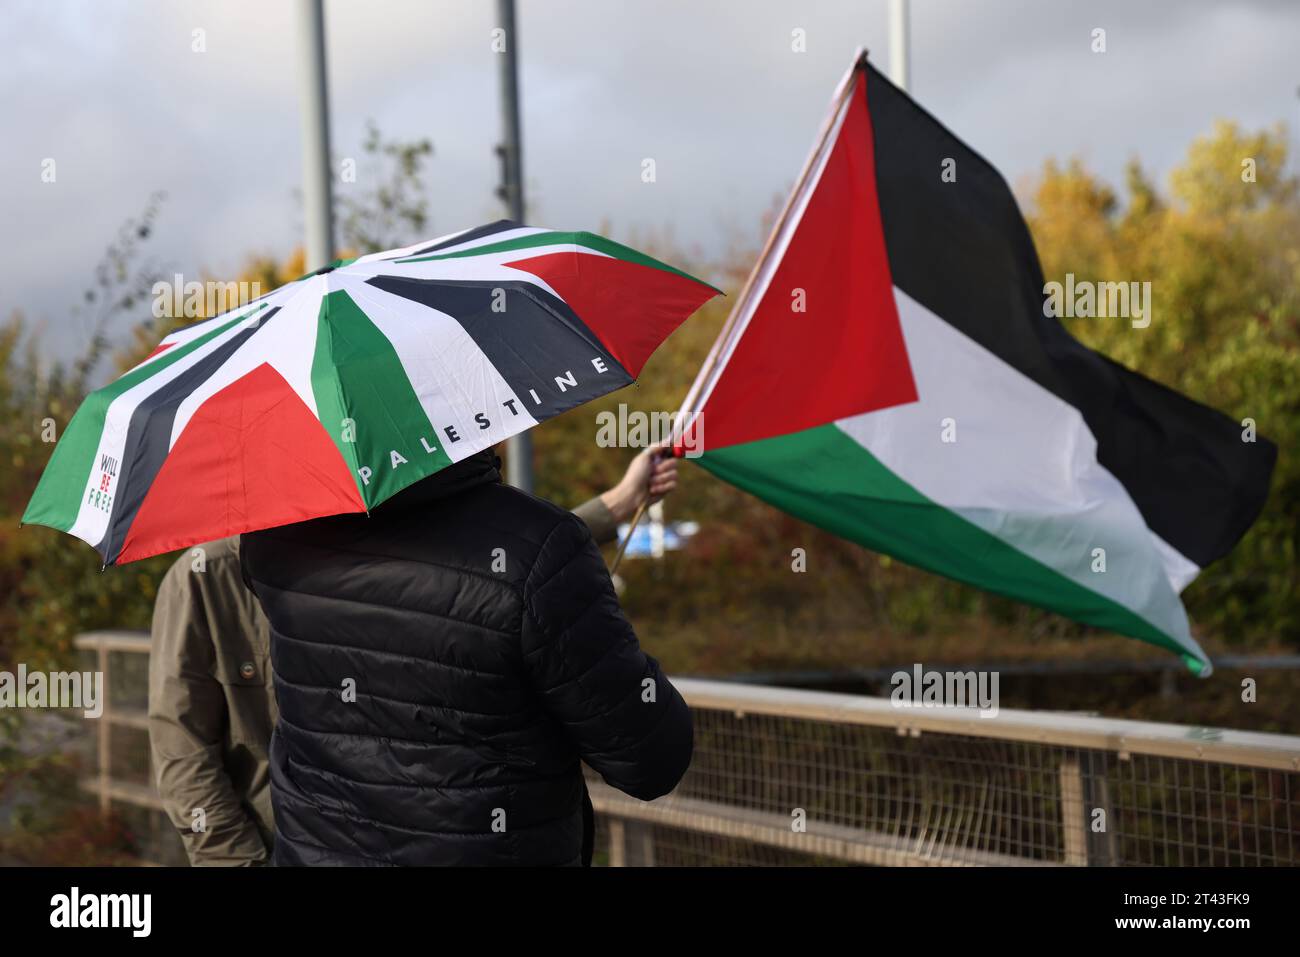 Leicester, Leicestershire, UK. 28th October 2023. Protesters wave flags during a pro-Palestinian demonstration and banner drop near to the base of UAV Tactical Systems. UAV Tactical Systems is an Israeli-French company manufacturing drones sold to the British army, Israel and international arms markets. Credit Darren Staples/Alamy Live News. Stock Photo